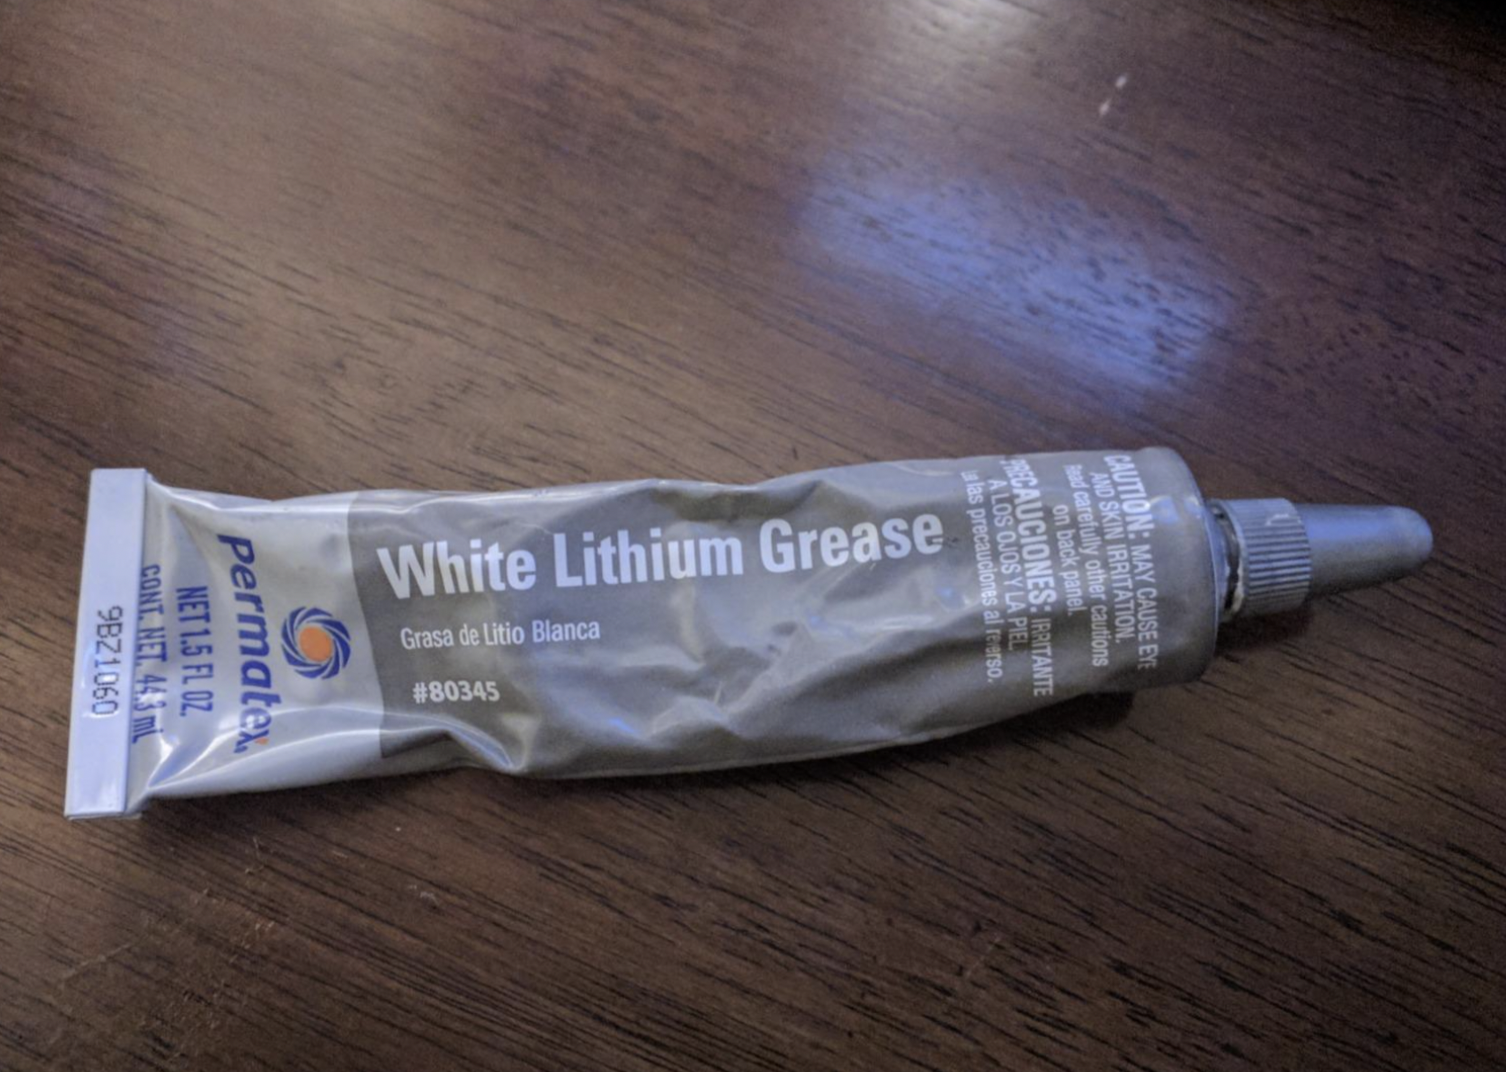 Reviewer image of small tube of white lithium grease